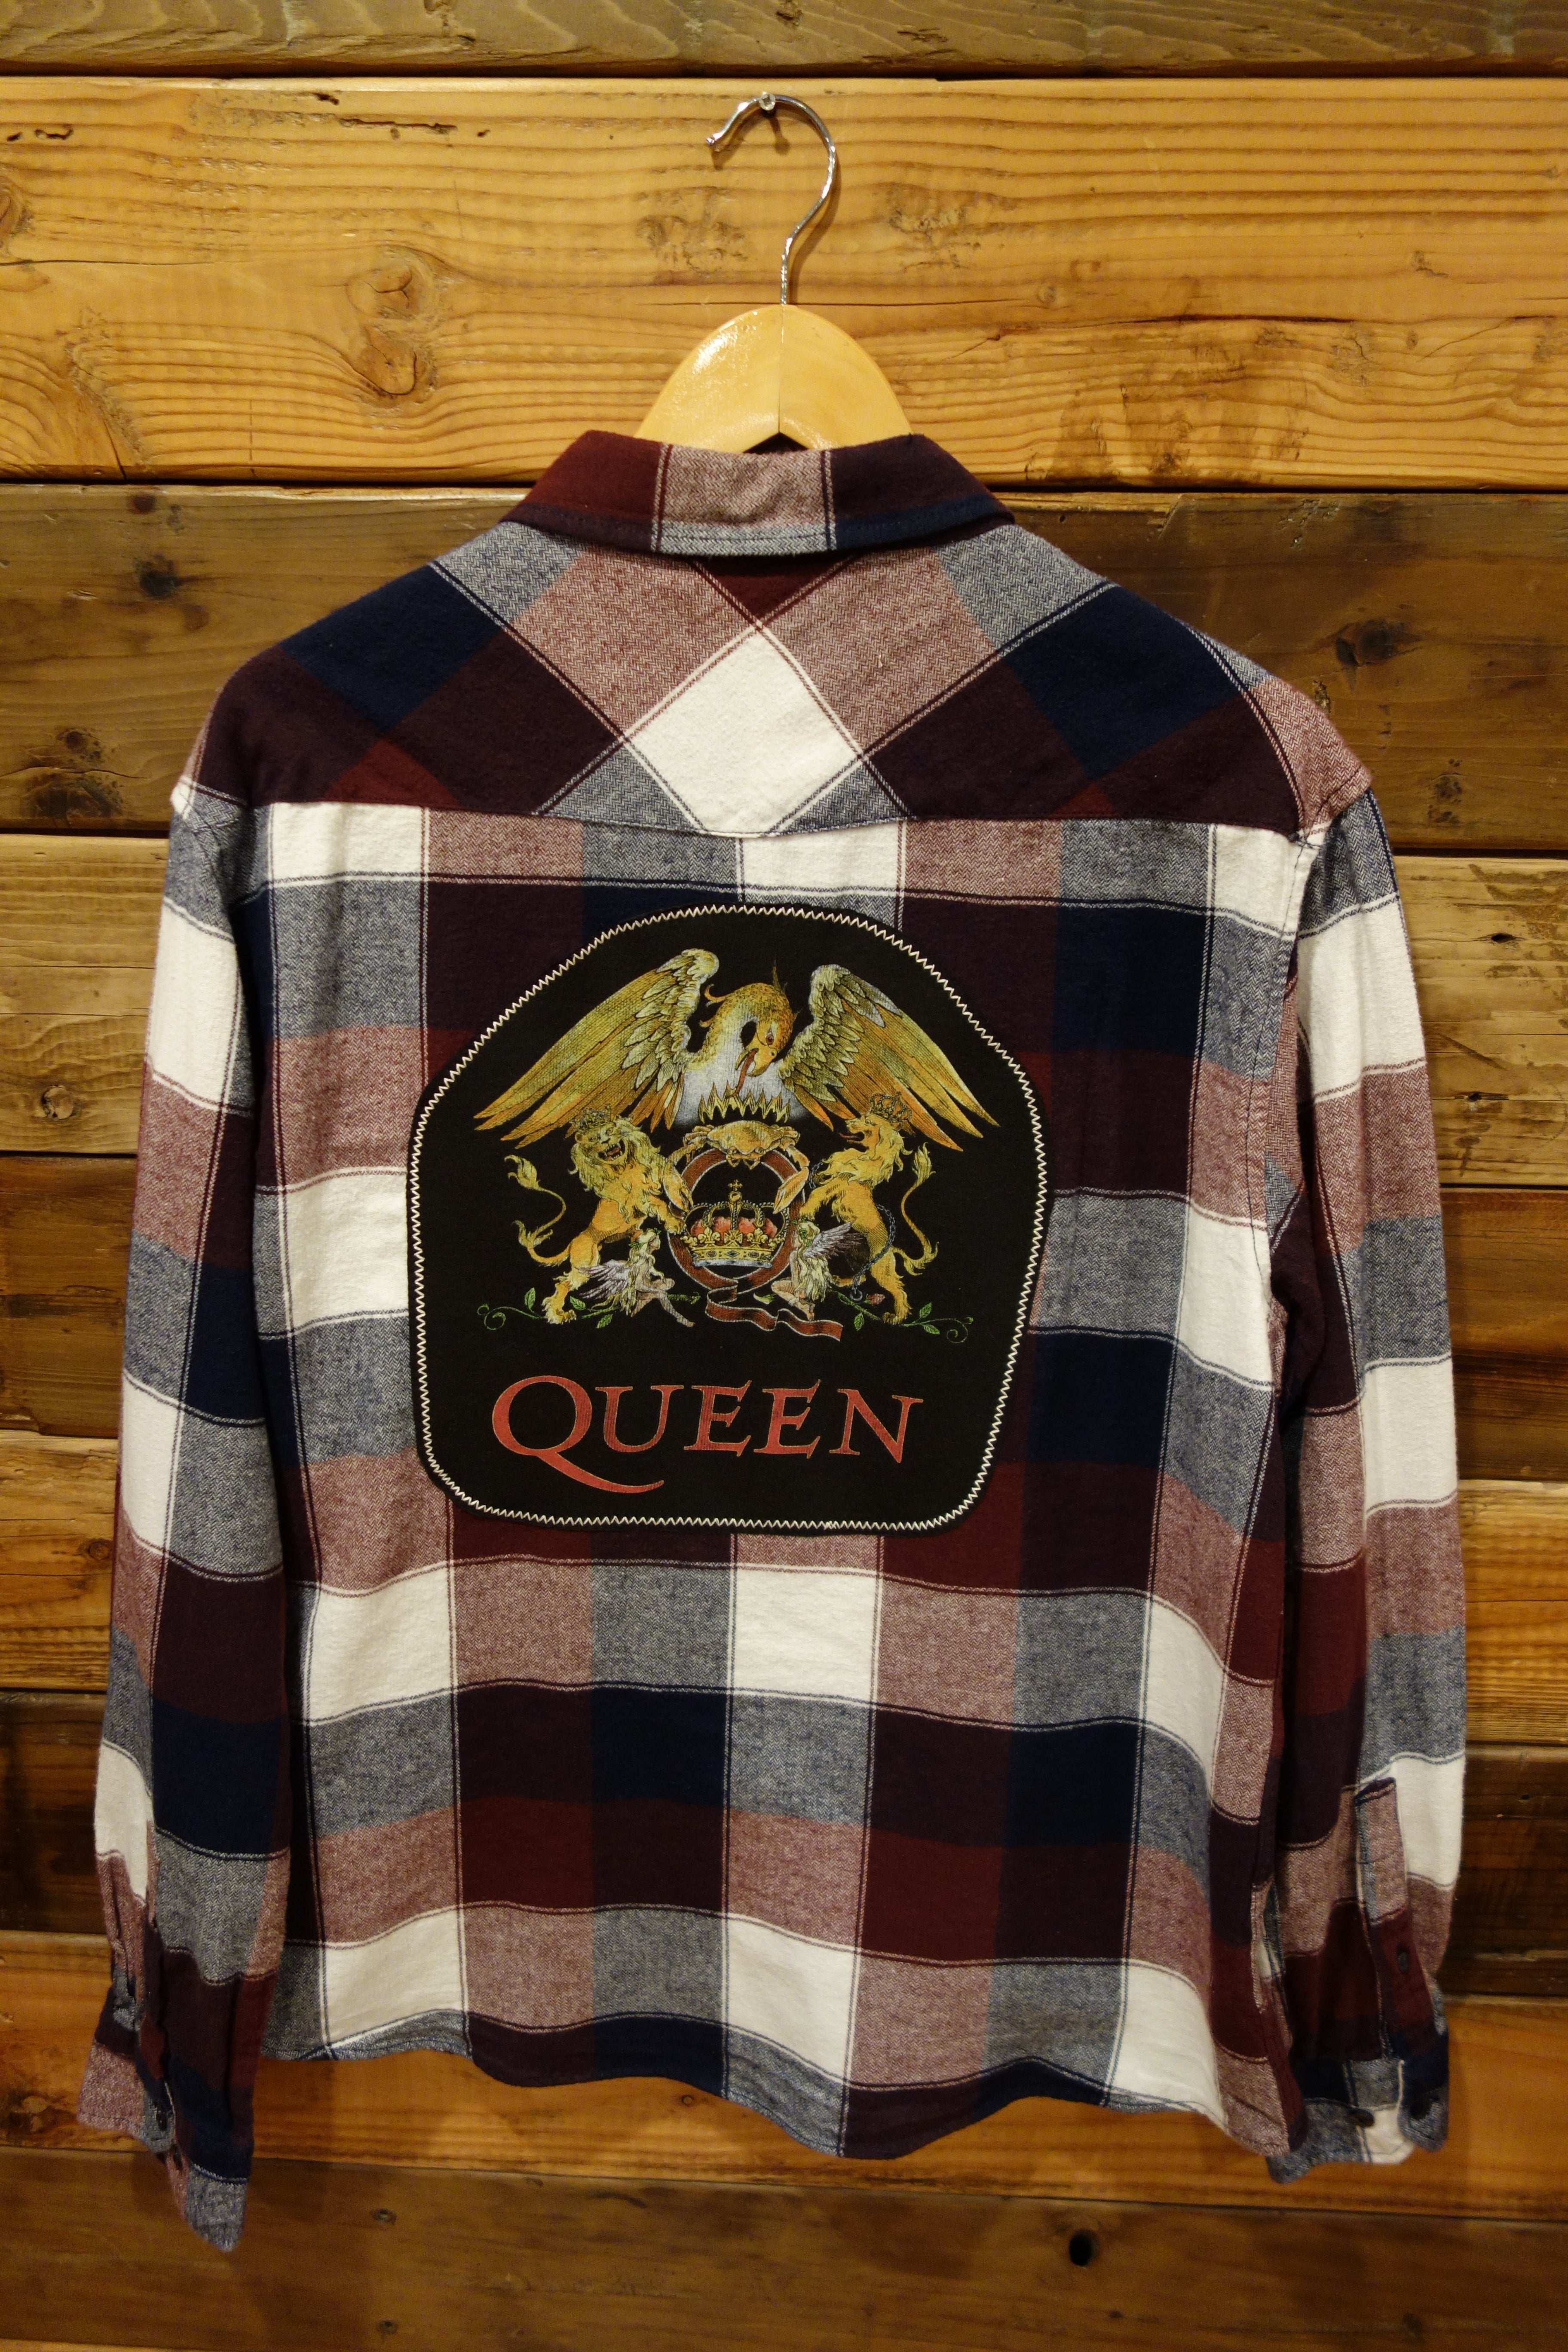 Queen band tee, one-of-a-kind custom Coastal vintage surf flannel